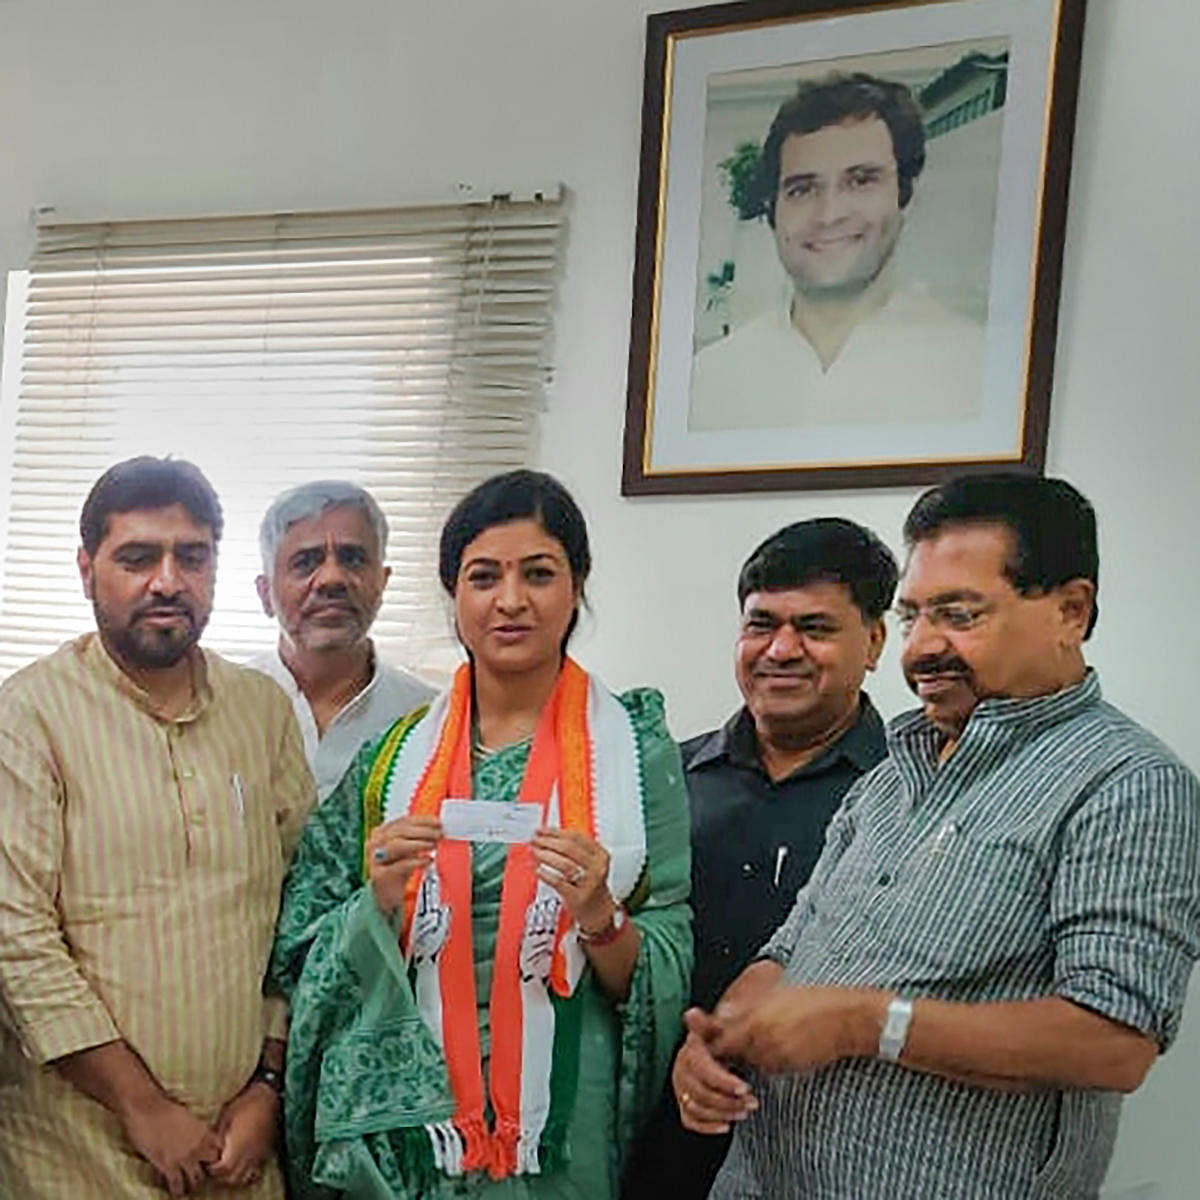  Aam Aadmi Party MLA from Chandni Chowk Alka Lamba joins the Congress party in presence of the party's in-charge of Delhi P C Chacko, in New Delhi, Saturday, Oct. 12, 2019. (PTI Photo) 